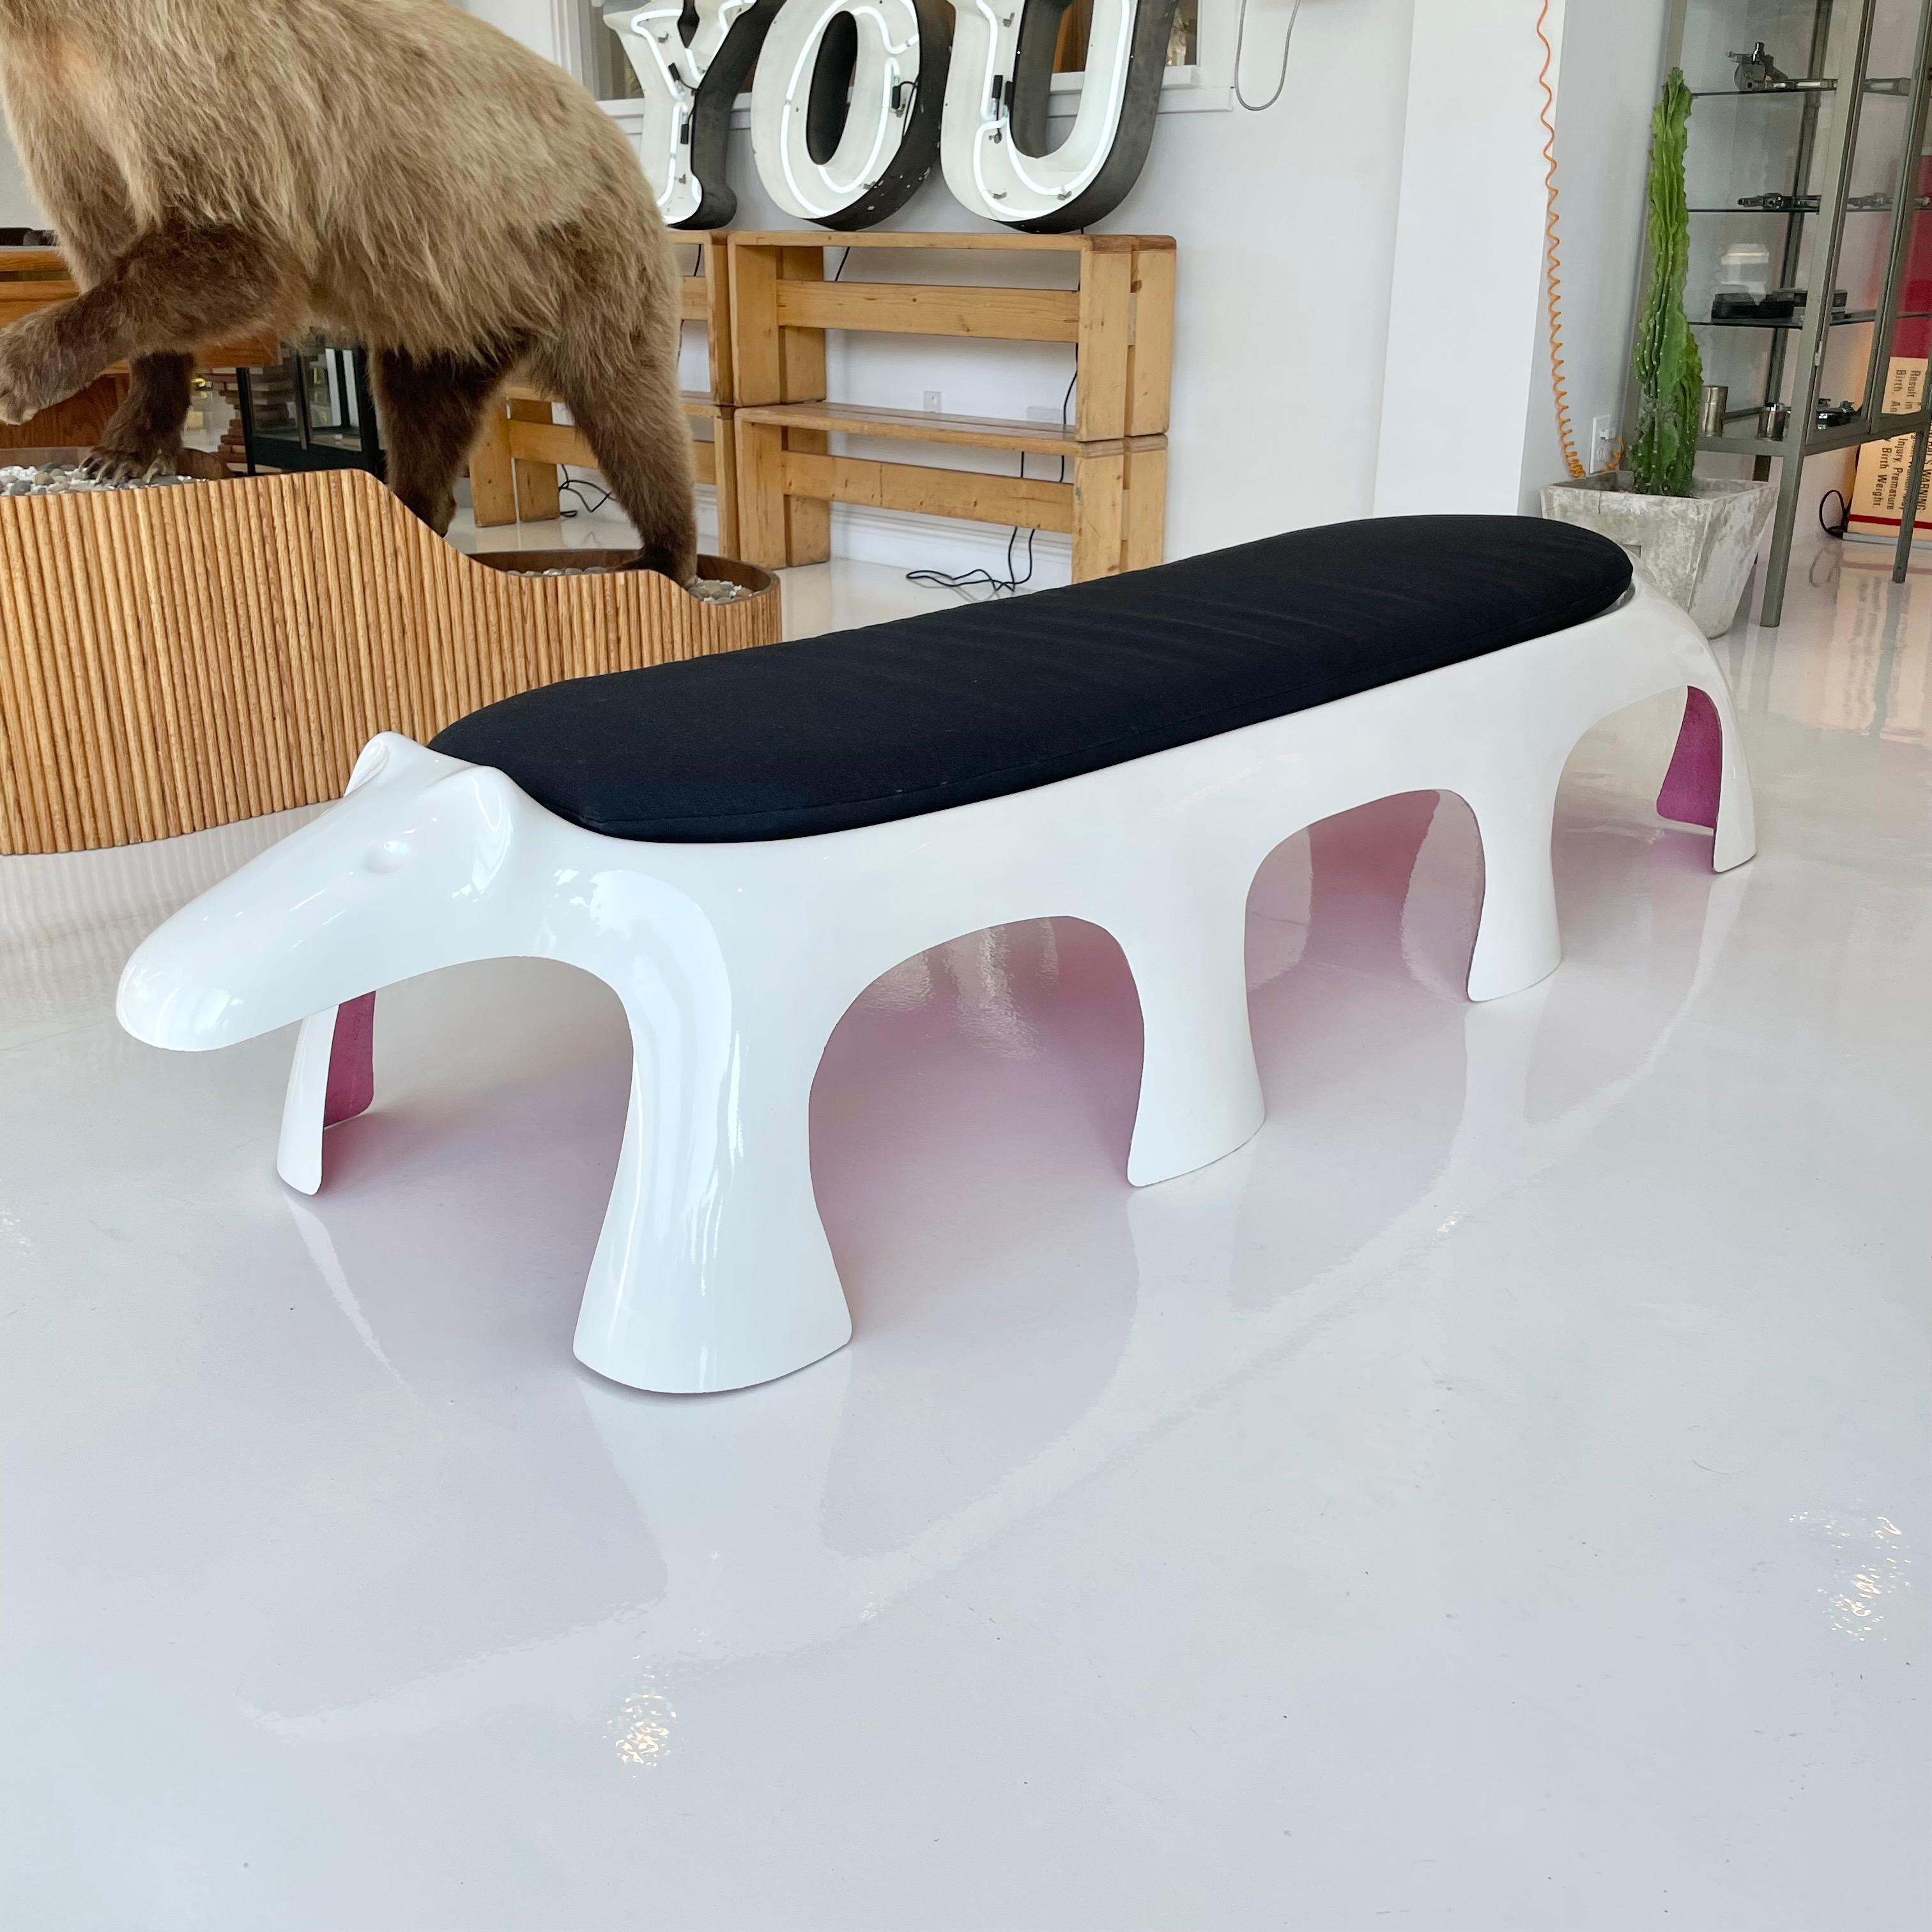 Monumental fiberglass bench in the shape of an Aardvark, made for Kotobuki Japan in the 1960s. White fiberglass outer shell with pink fiberglass underside. Newly made custom seat cushion. Fantastic piece of sculpture and functional seat. Only one